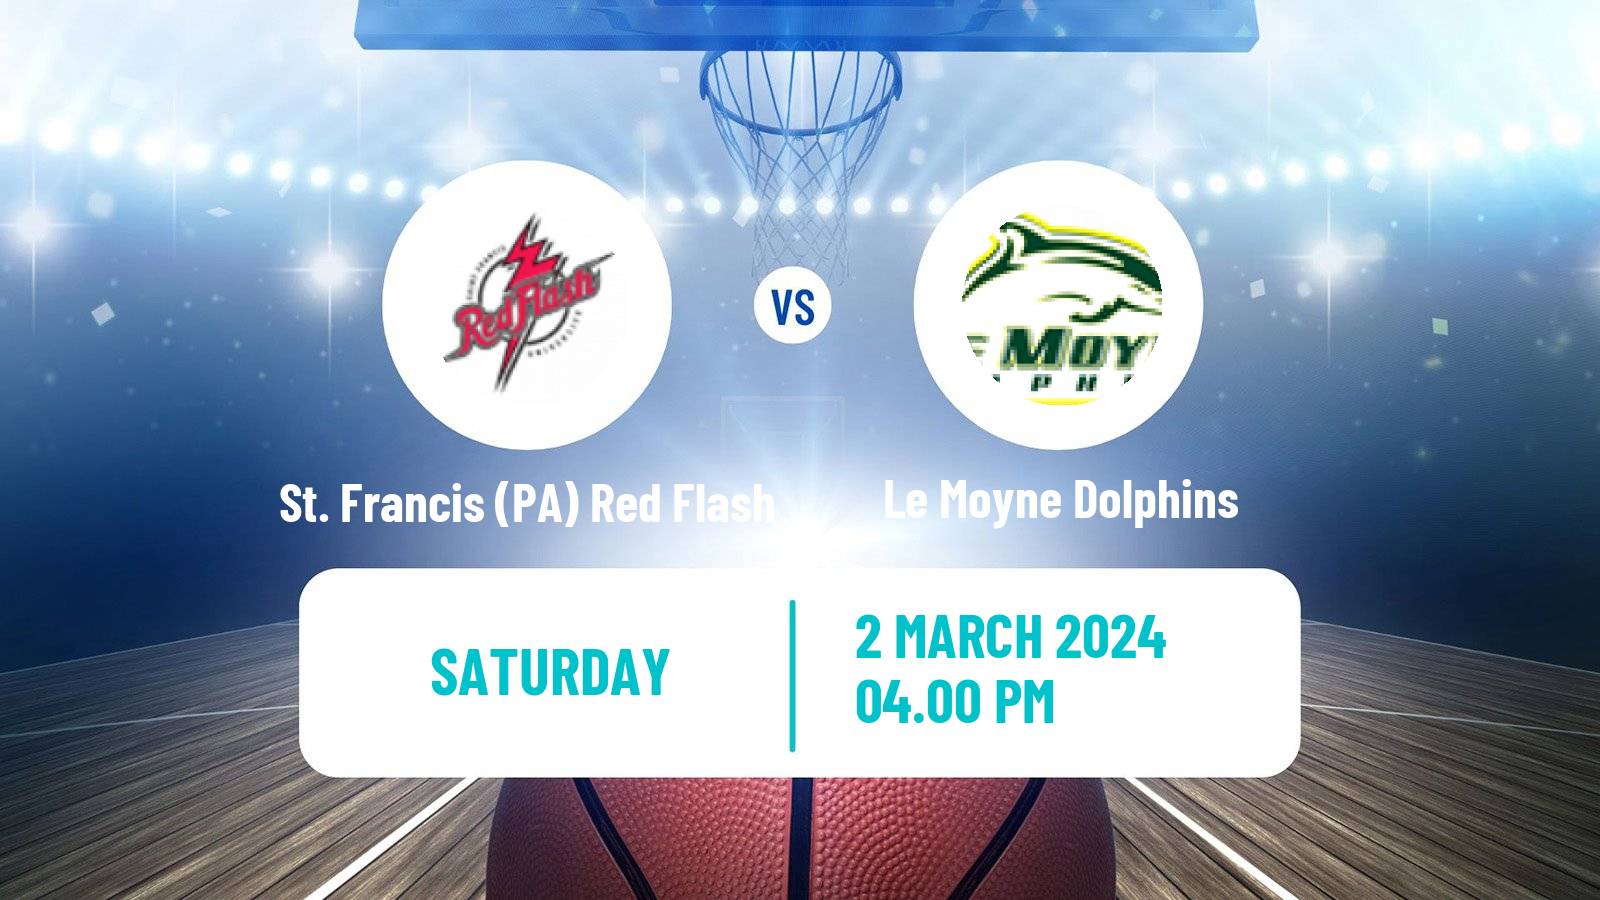 Basketball NCAA College Basketball St. Francis (PA) Red Flash - Le Moyne Dolphins